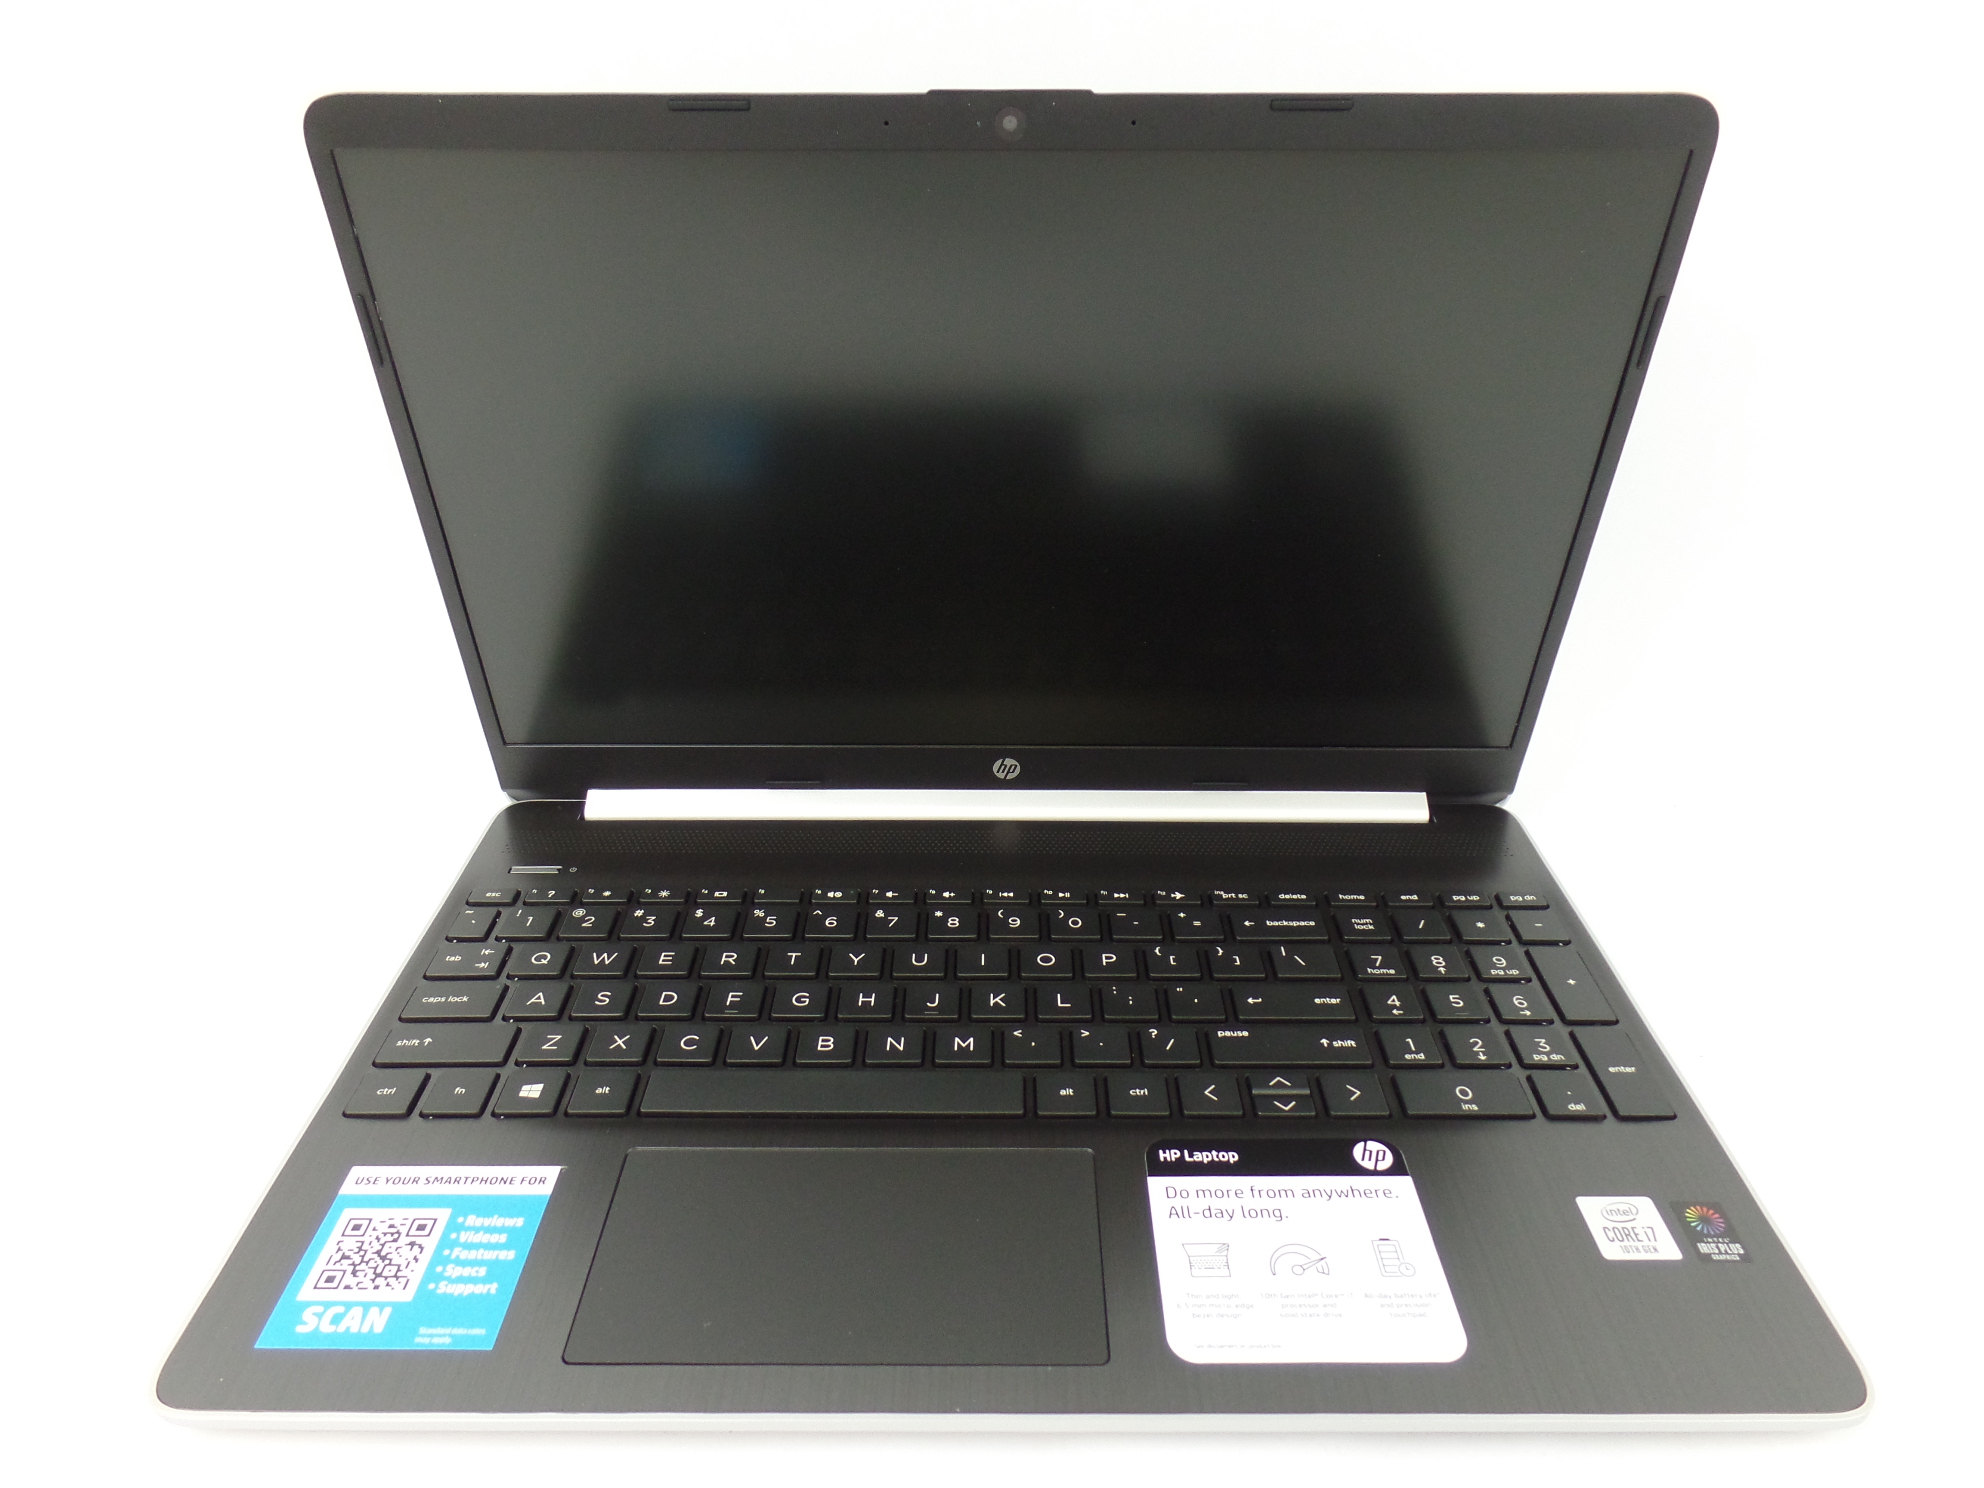 Used (good working condition) HP 15-dy1078nr 15.6" HD i7-1065G7 1.3GHz 8GB 256GB SSD Iris Plus W10H Laptop SD - image 2 of 6